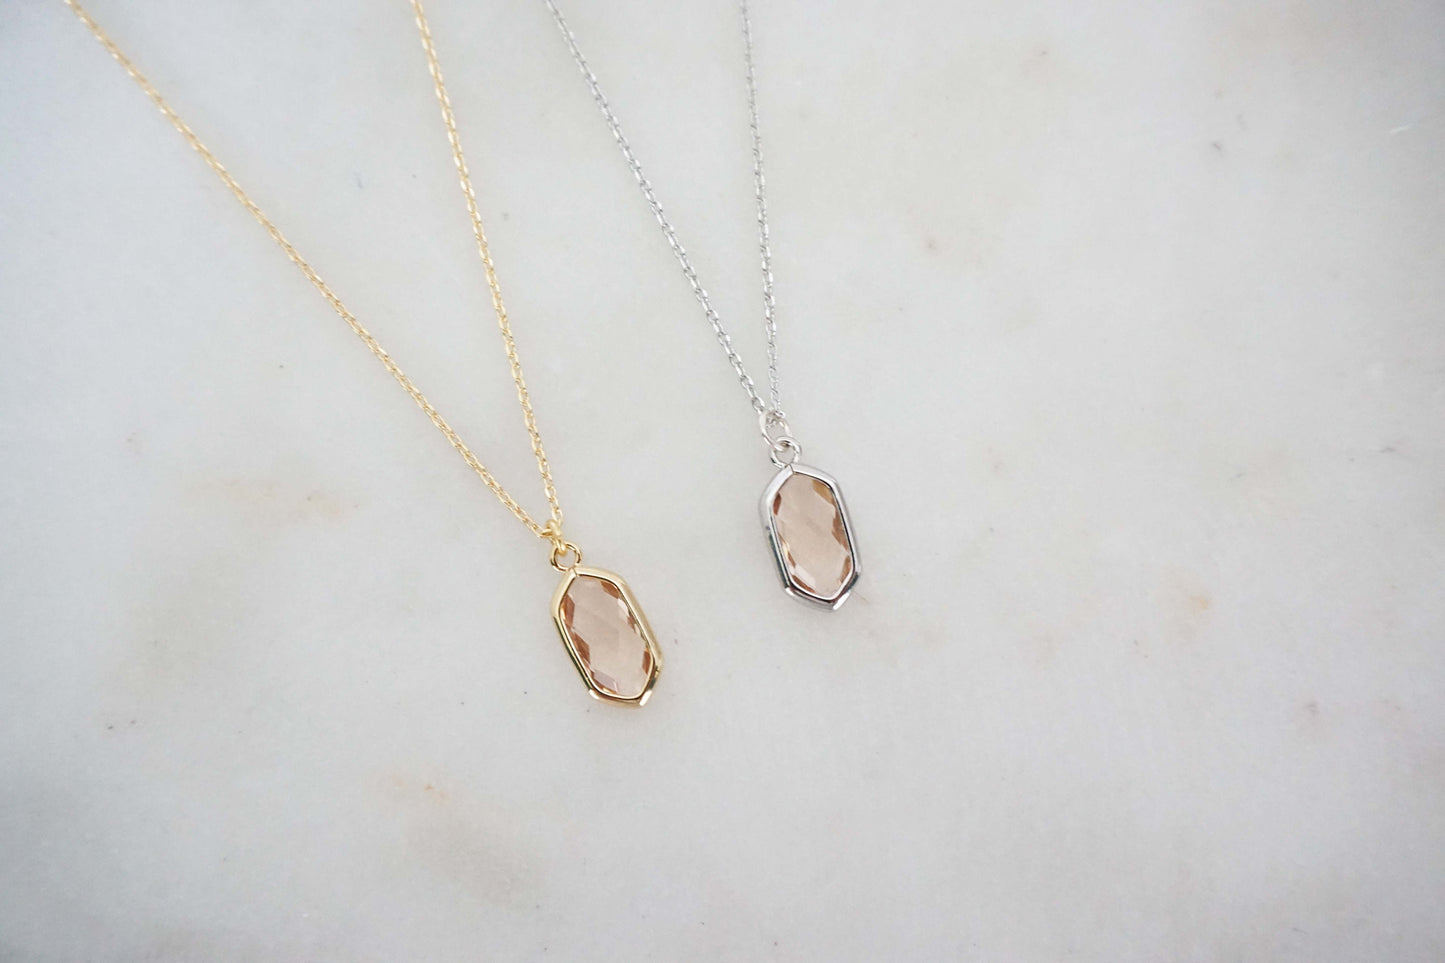 Champagne Gem Hexagon Necklaces | Bridesmaid Necklace | Wedding Jewelry | NCHPG33, NCHPS33